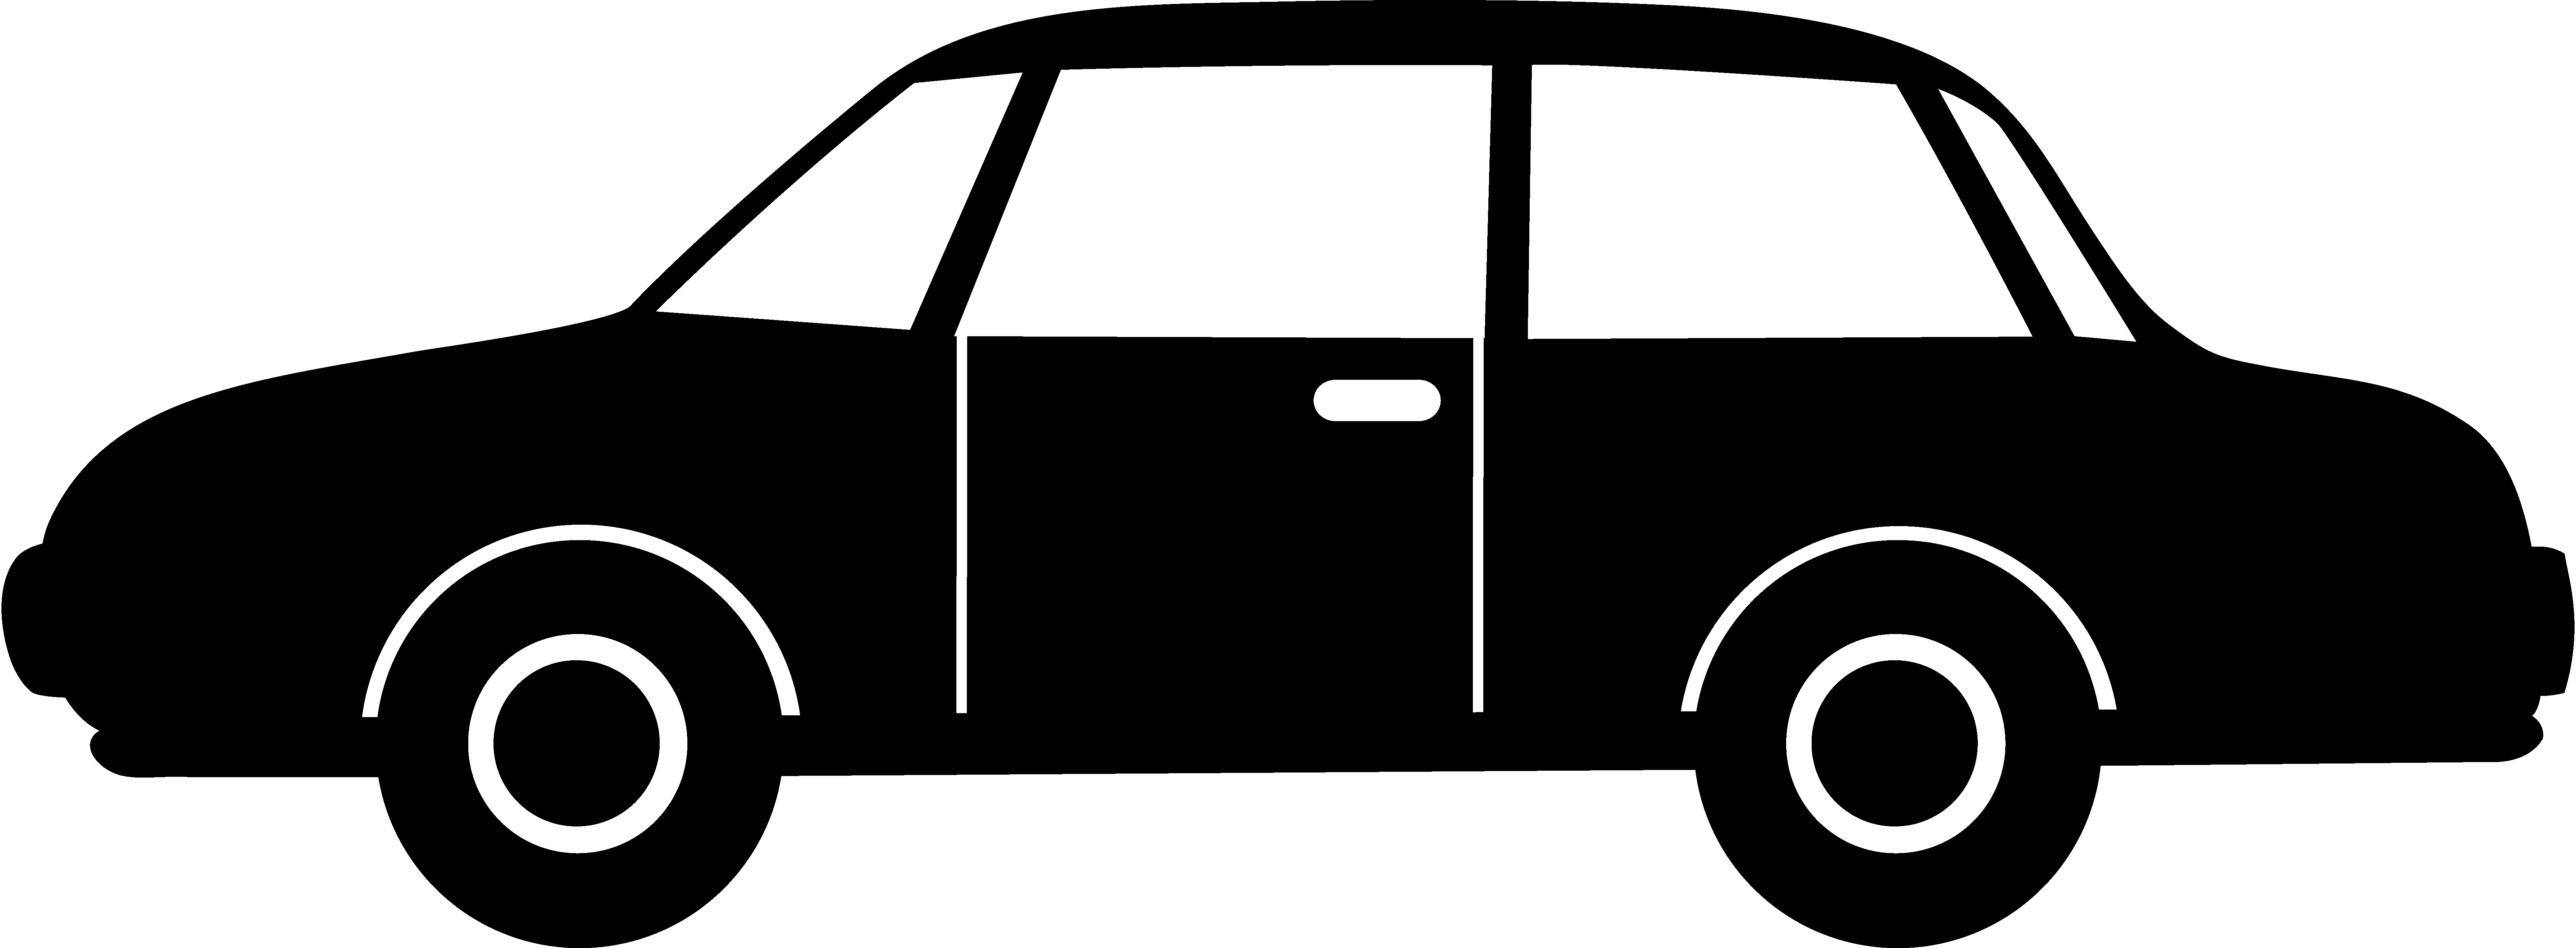 Car Clipart Black And White Clipart Free Clipart Images